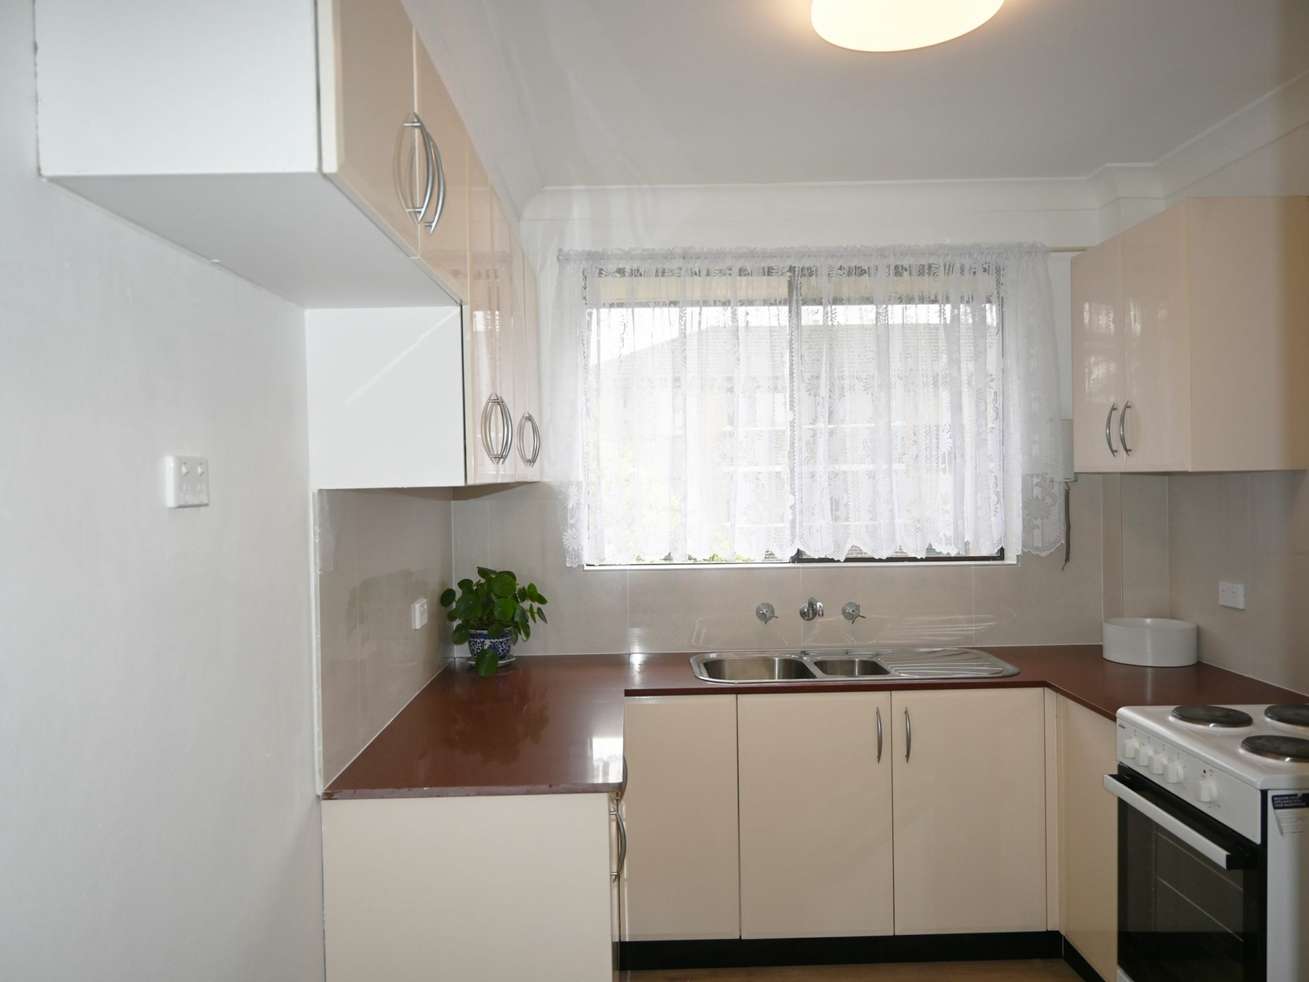 Main view of Homely unit listing, 19/65 Mcburney Rd, Cabramatta NSW 2166